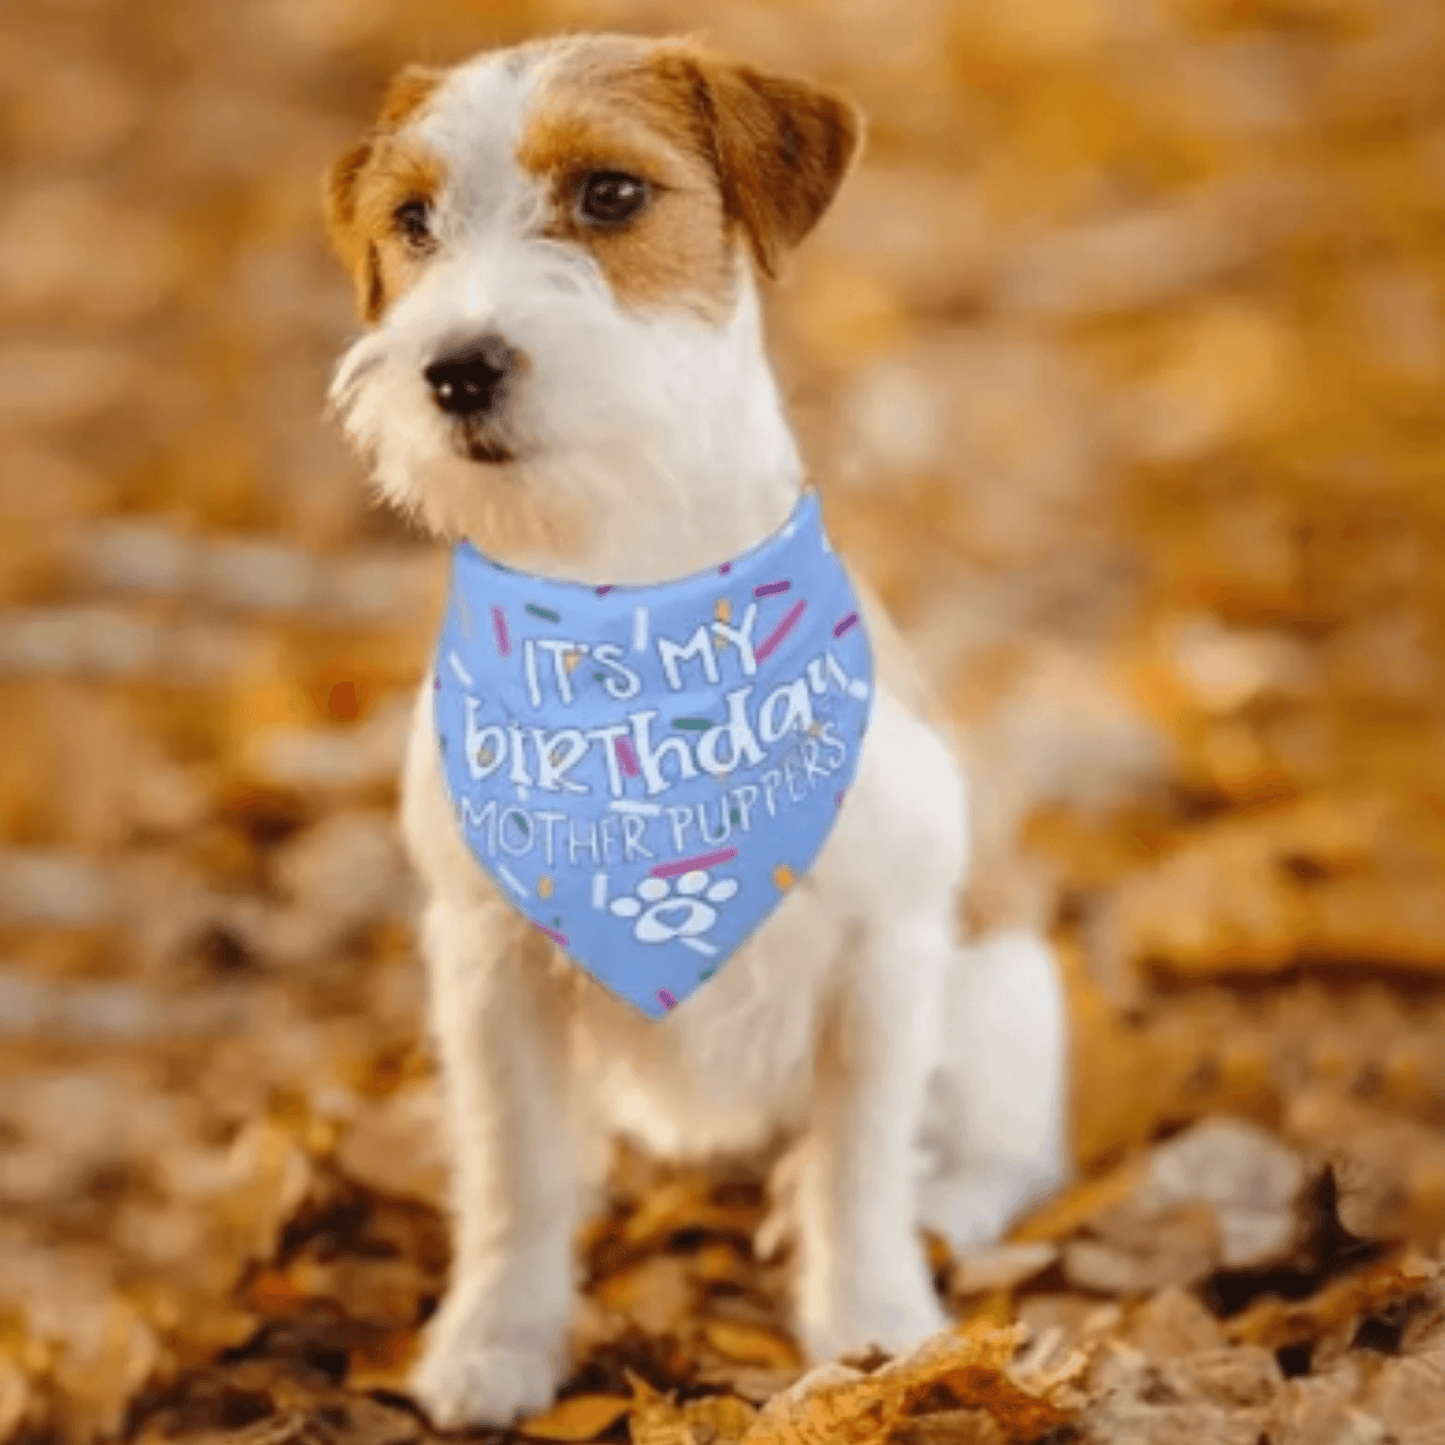 It's my birthday mother puppets, reversible dog bandana, tie up let's pawtyIt's my birthday mother puppets, reversible dog bandana, tie up let's pawty